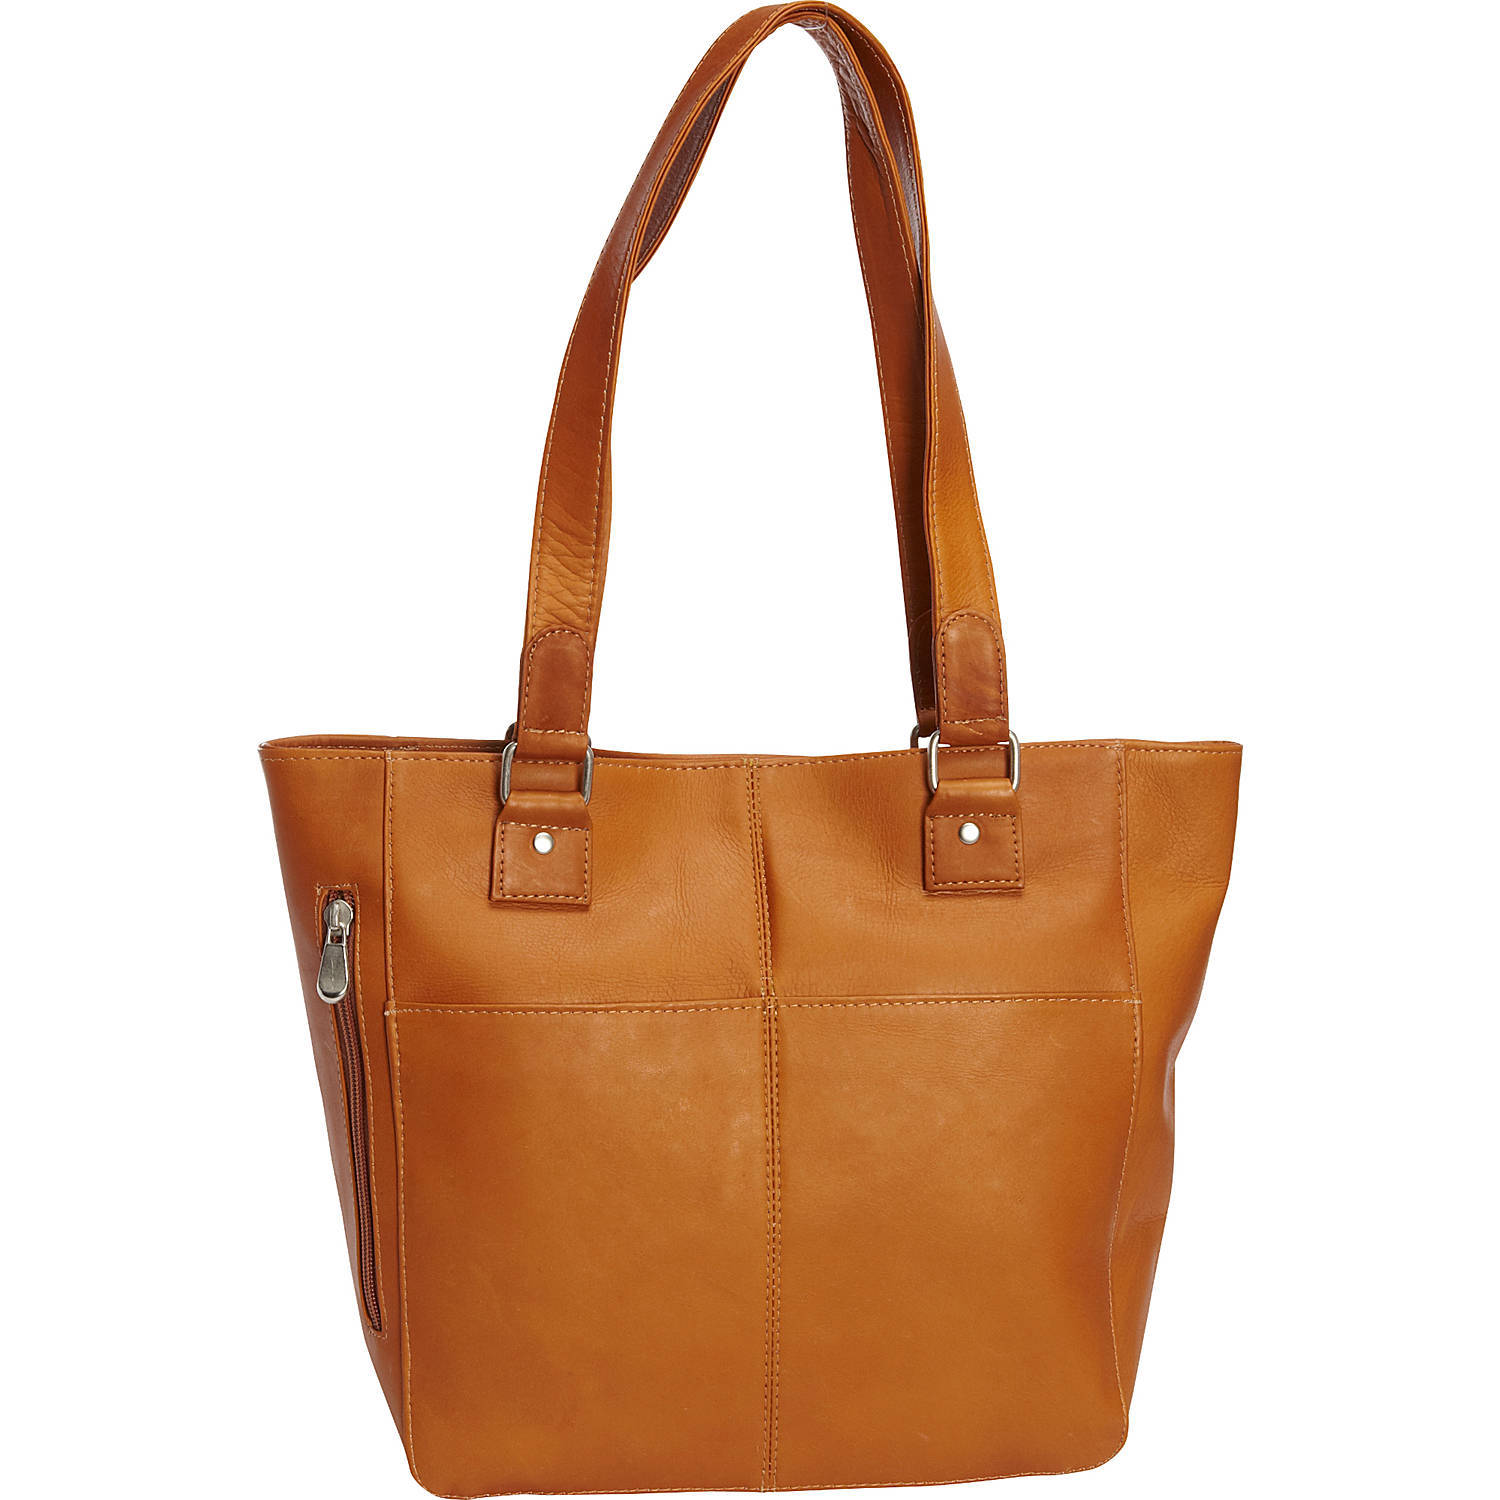 Le Donne Leather Garrowby Tote LD-9876 - image 1 of 6